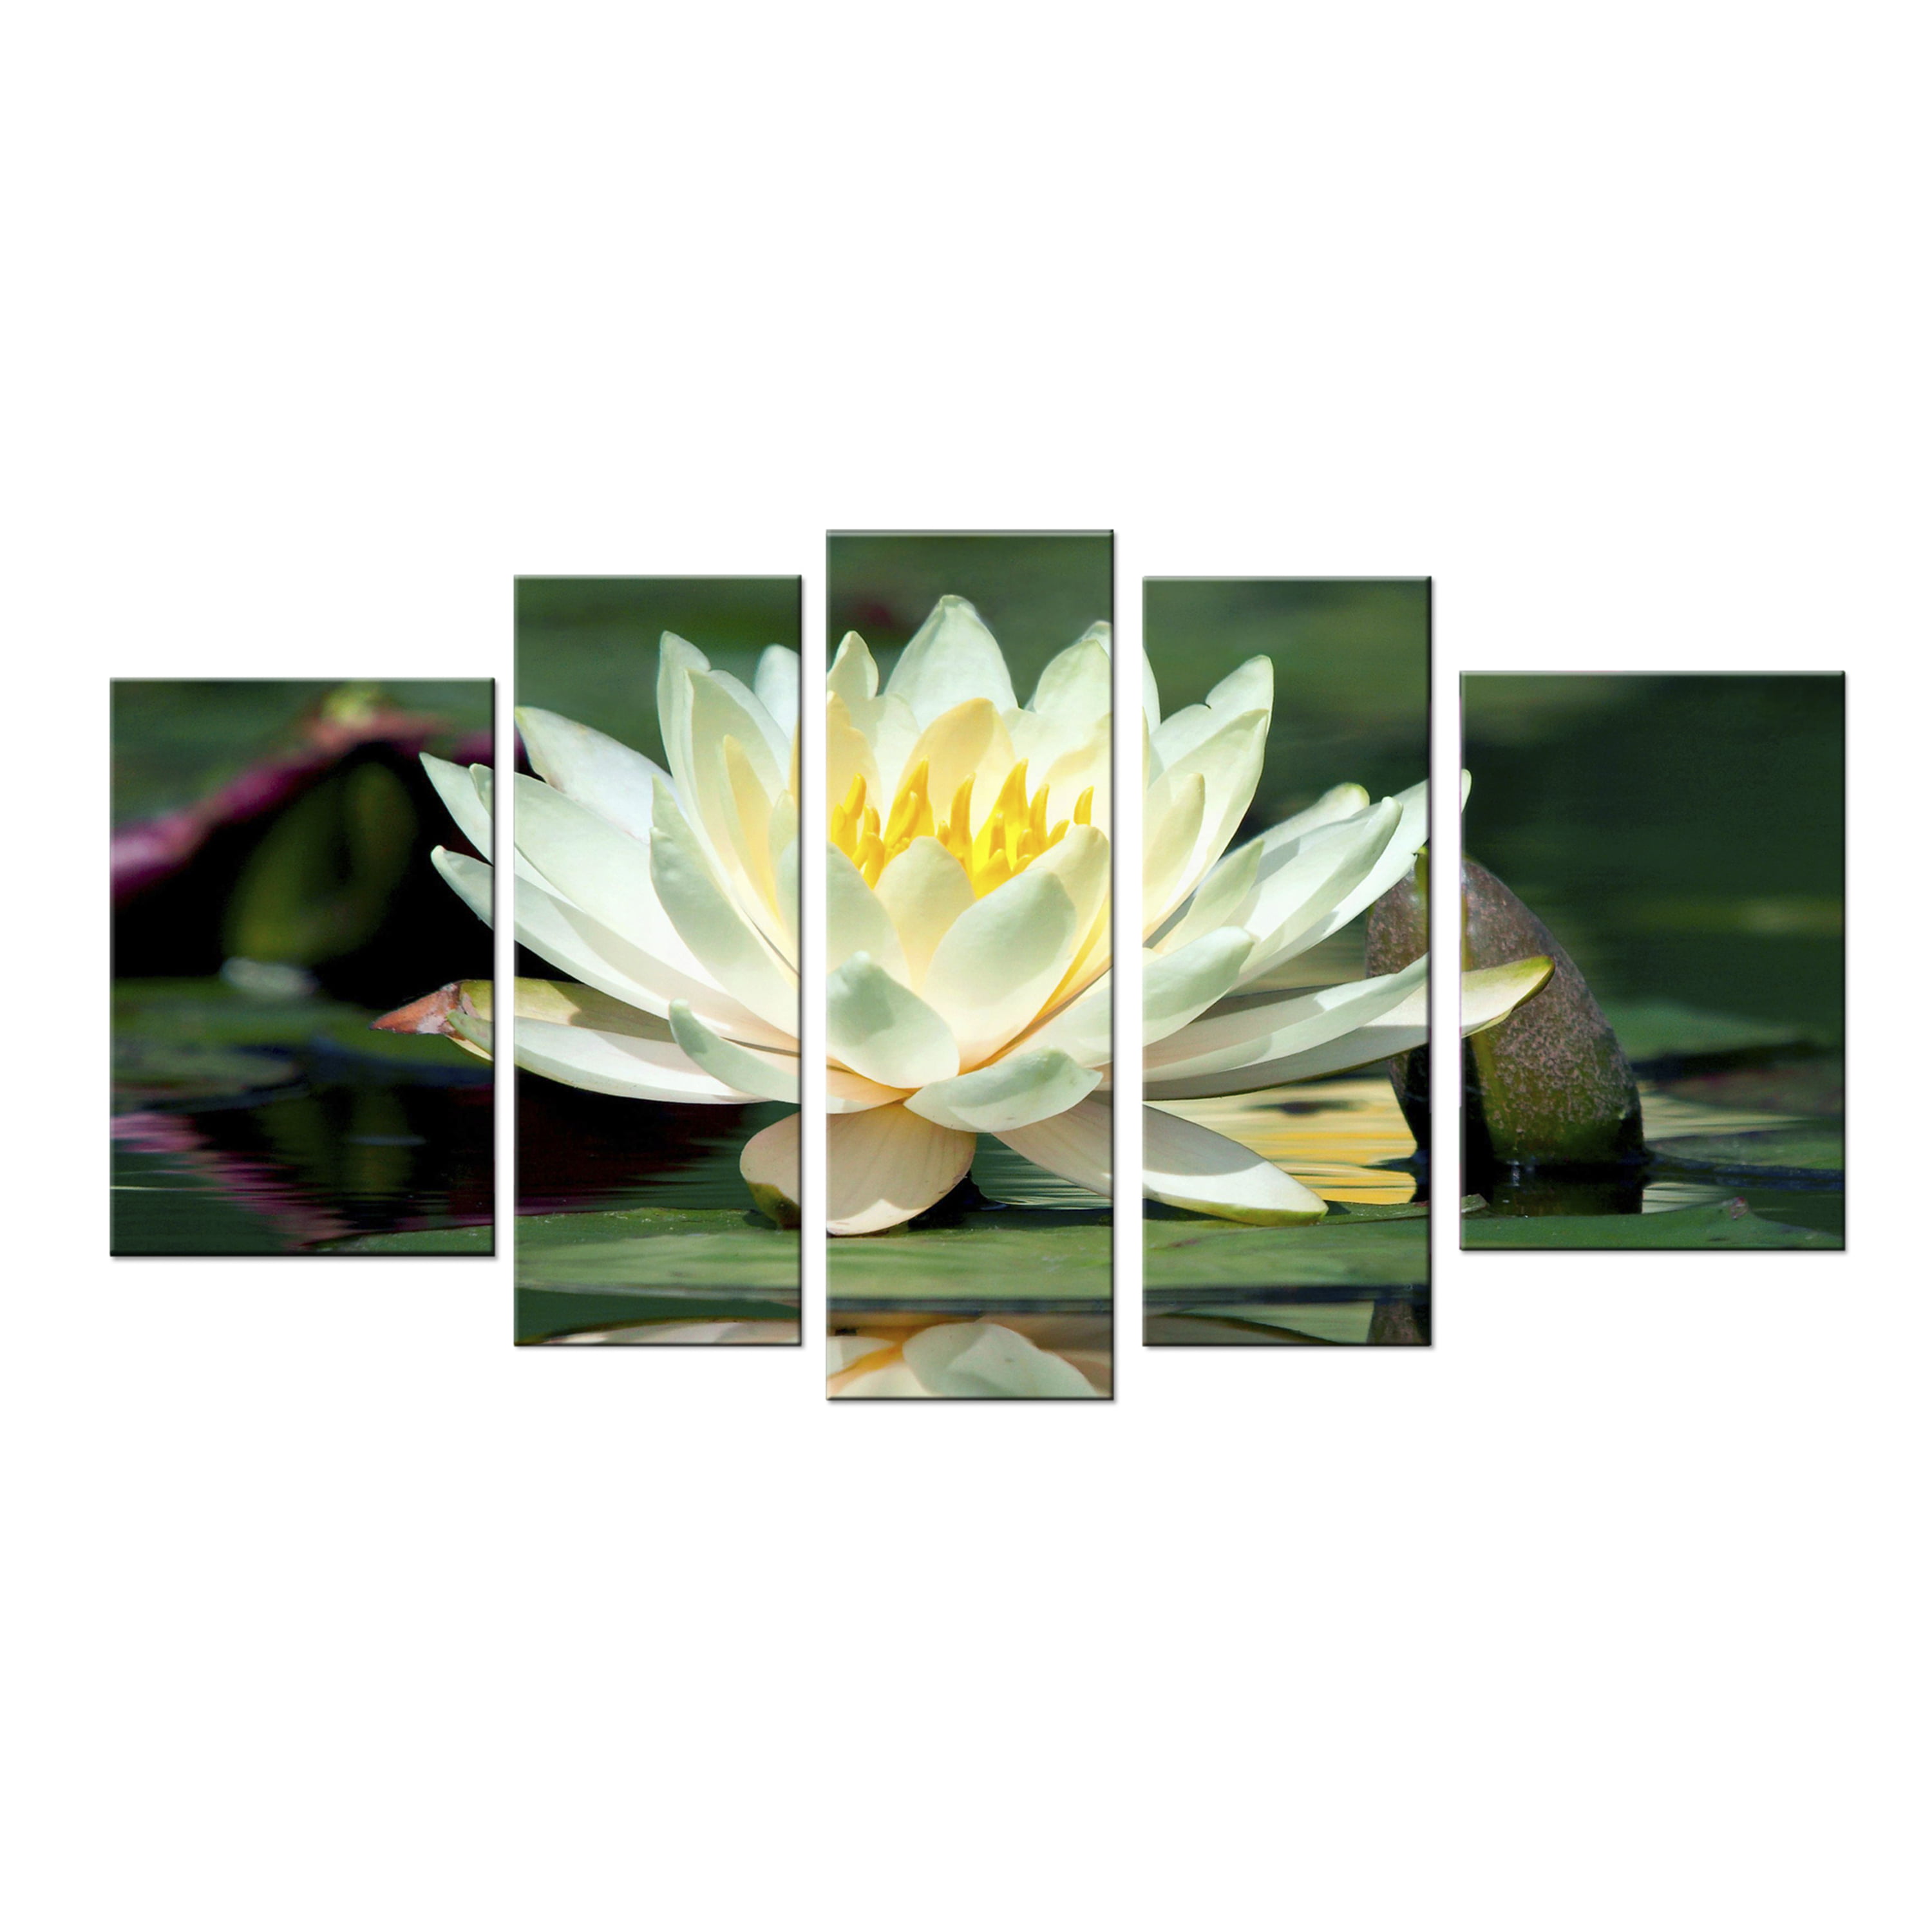 Nature Photography Prints Flower Pictures Fine Art Flower Photography Prints Water Lilies Flower Print Tropical Wall Art Waterlily Photo